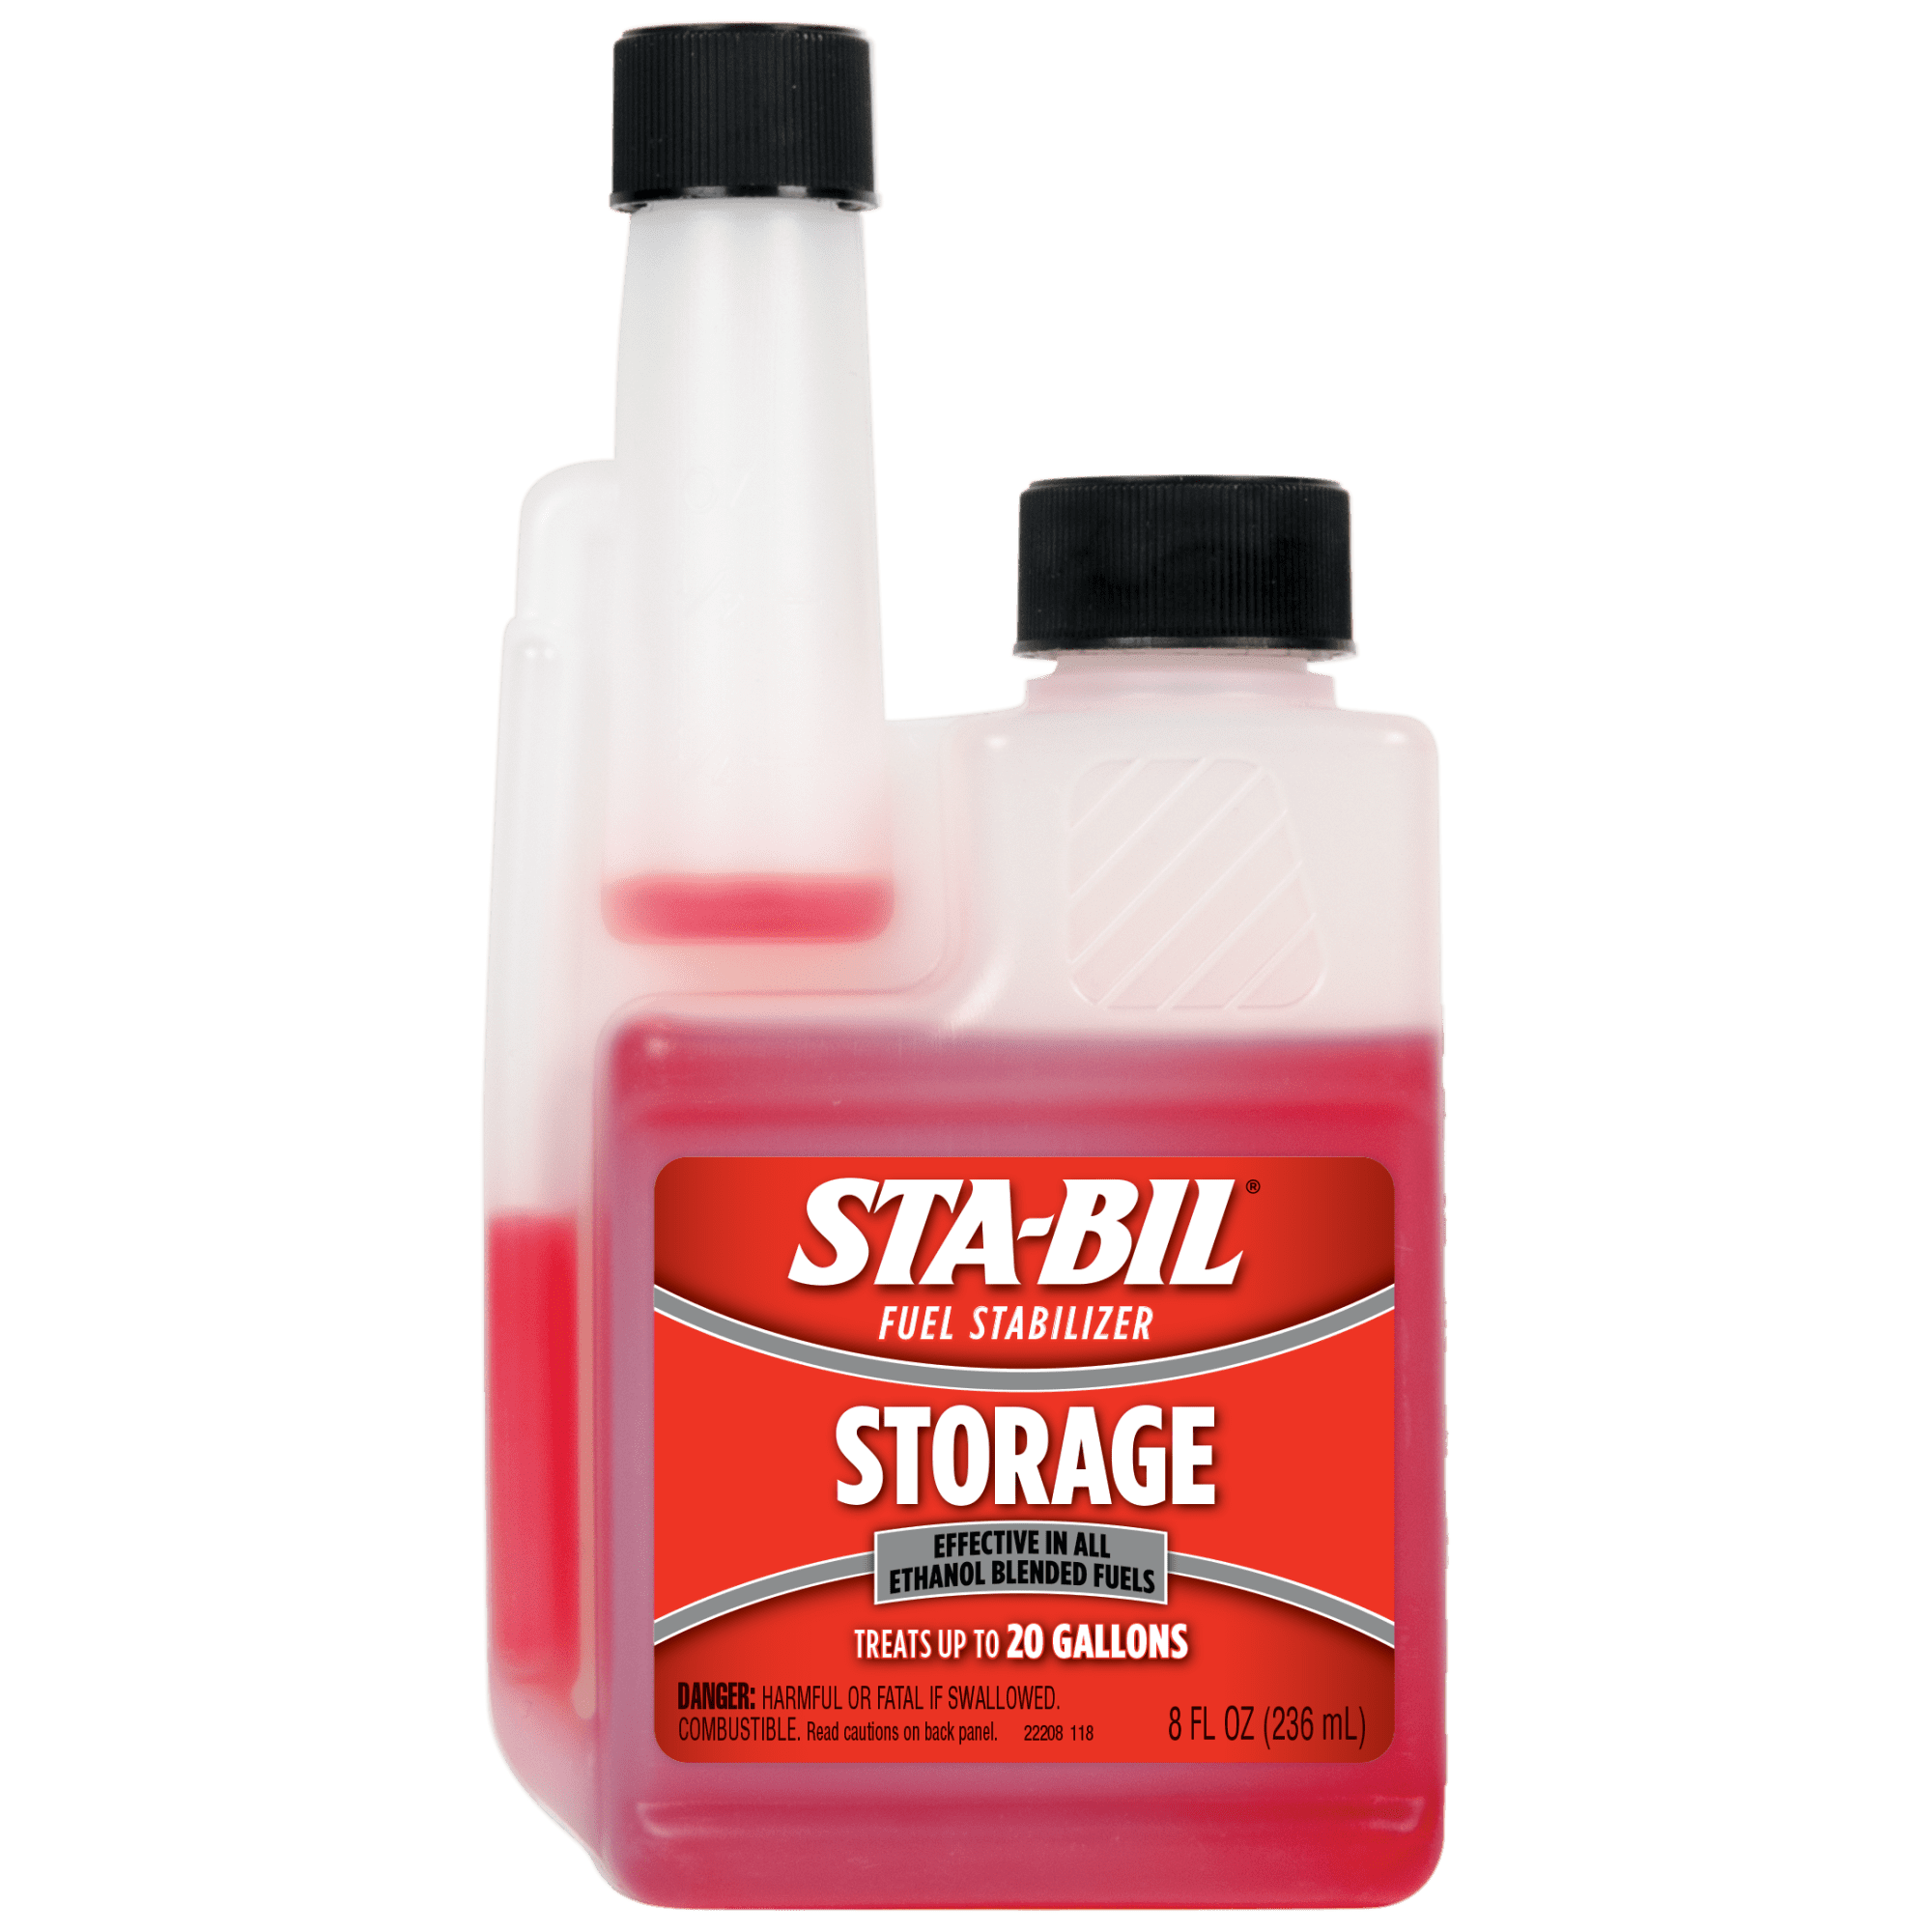 STA-BIL Storage Fuel Stabilizer - Guaranteed To Keep Fuel Fresh Fuel Up To Two Years - Effective In All Gasoline Including All Ethanol Blended Fuels - For Quick, Easy Starts, 8 fl. oz. (22208)